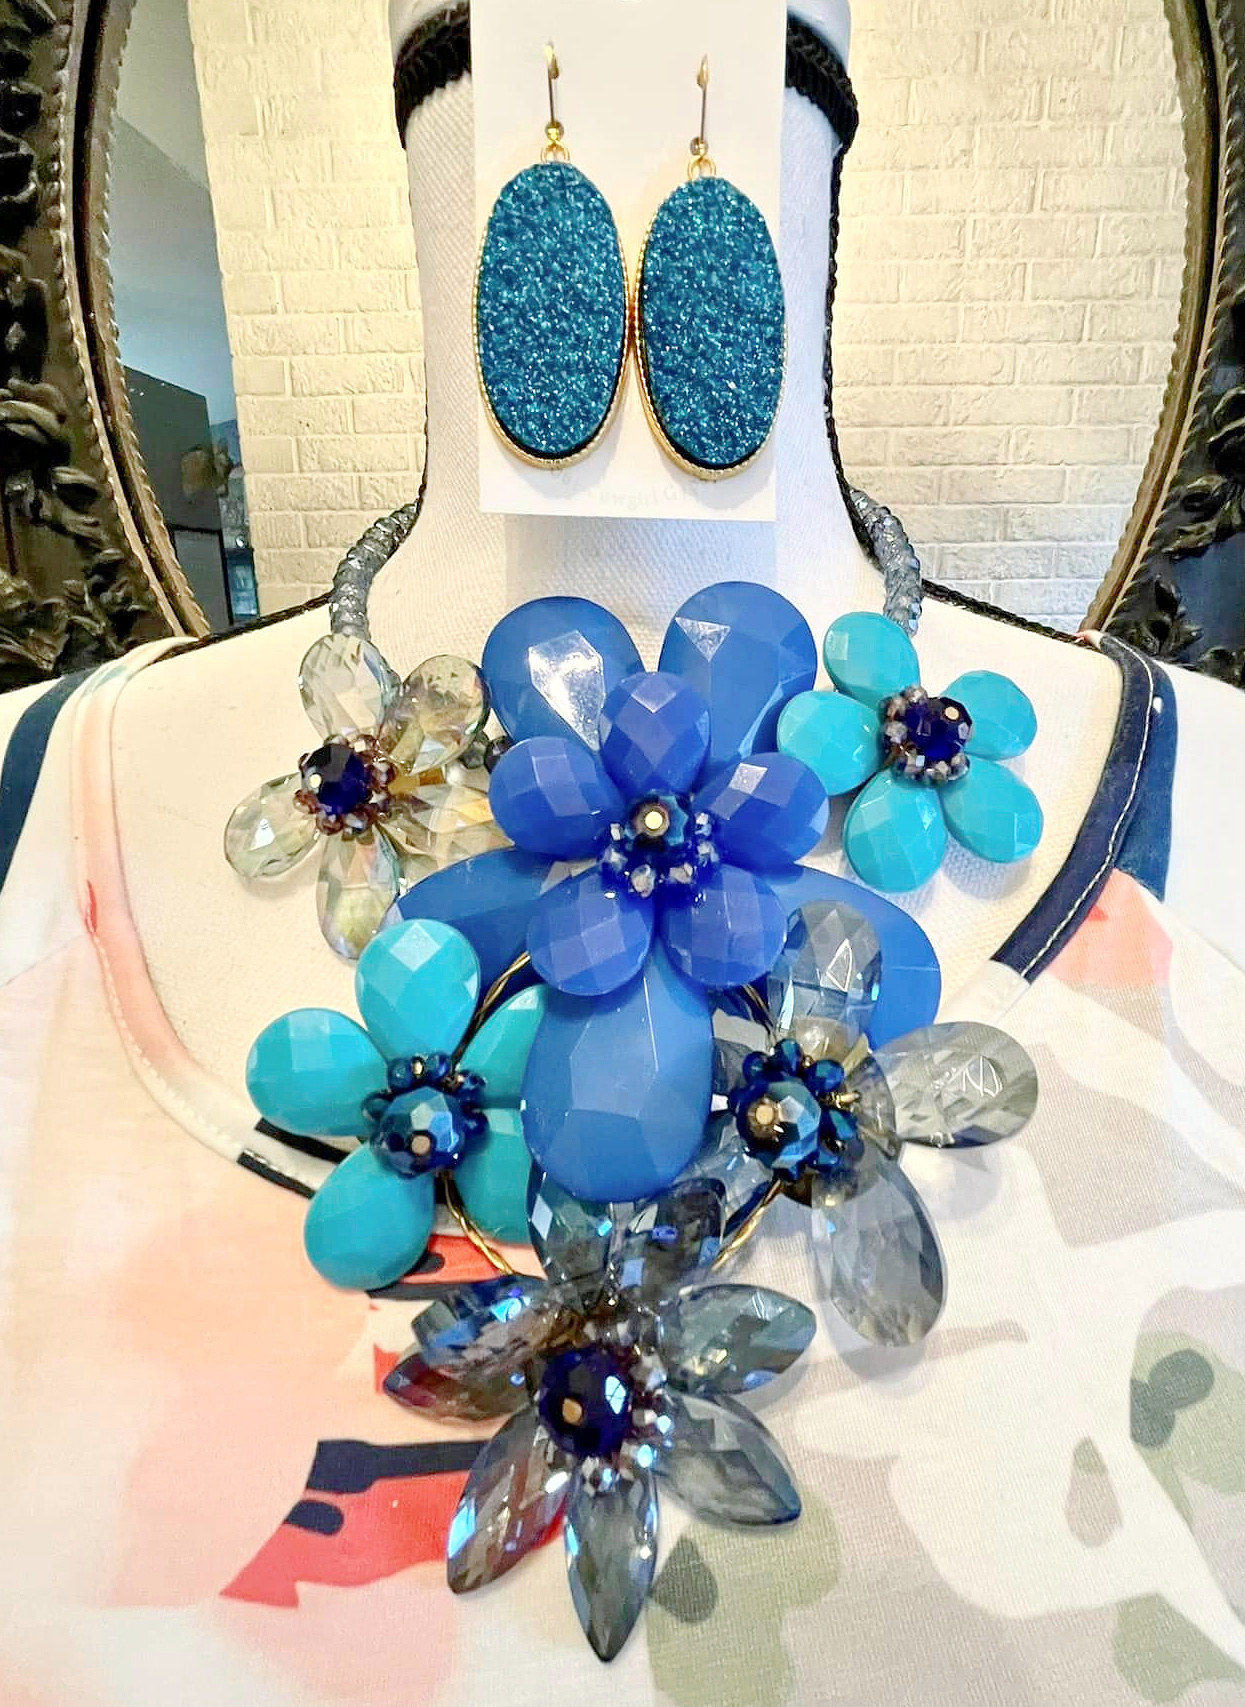 THE BLUE FLOWER NECKLACE Crystal Chain Blue Resin Flower Statement Bib Necklace